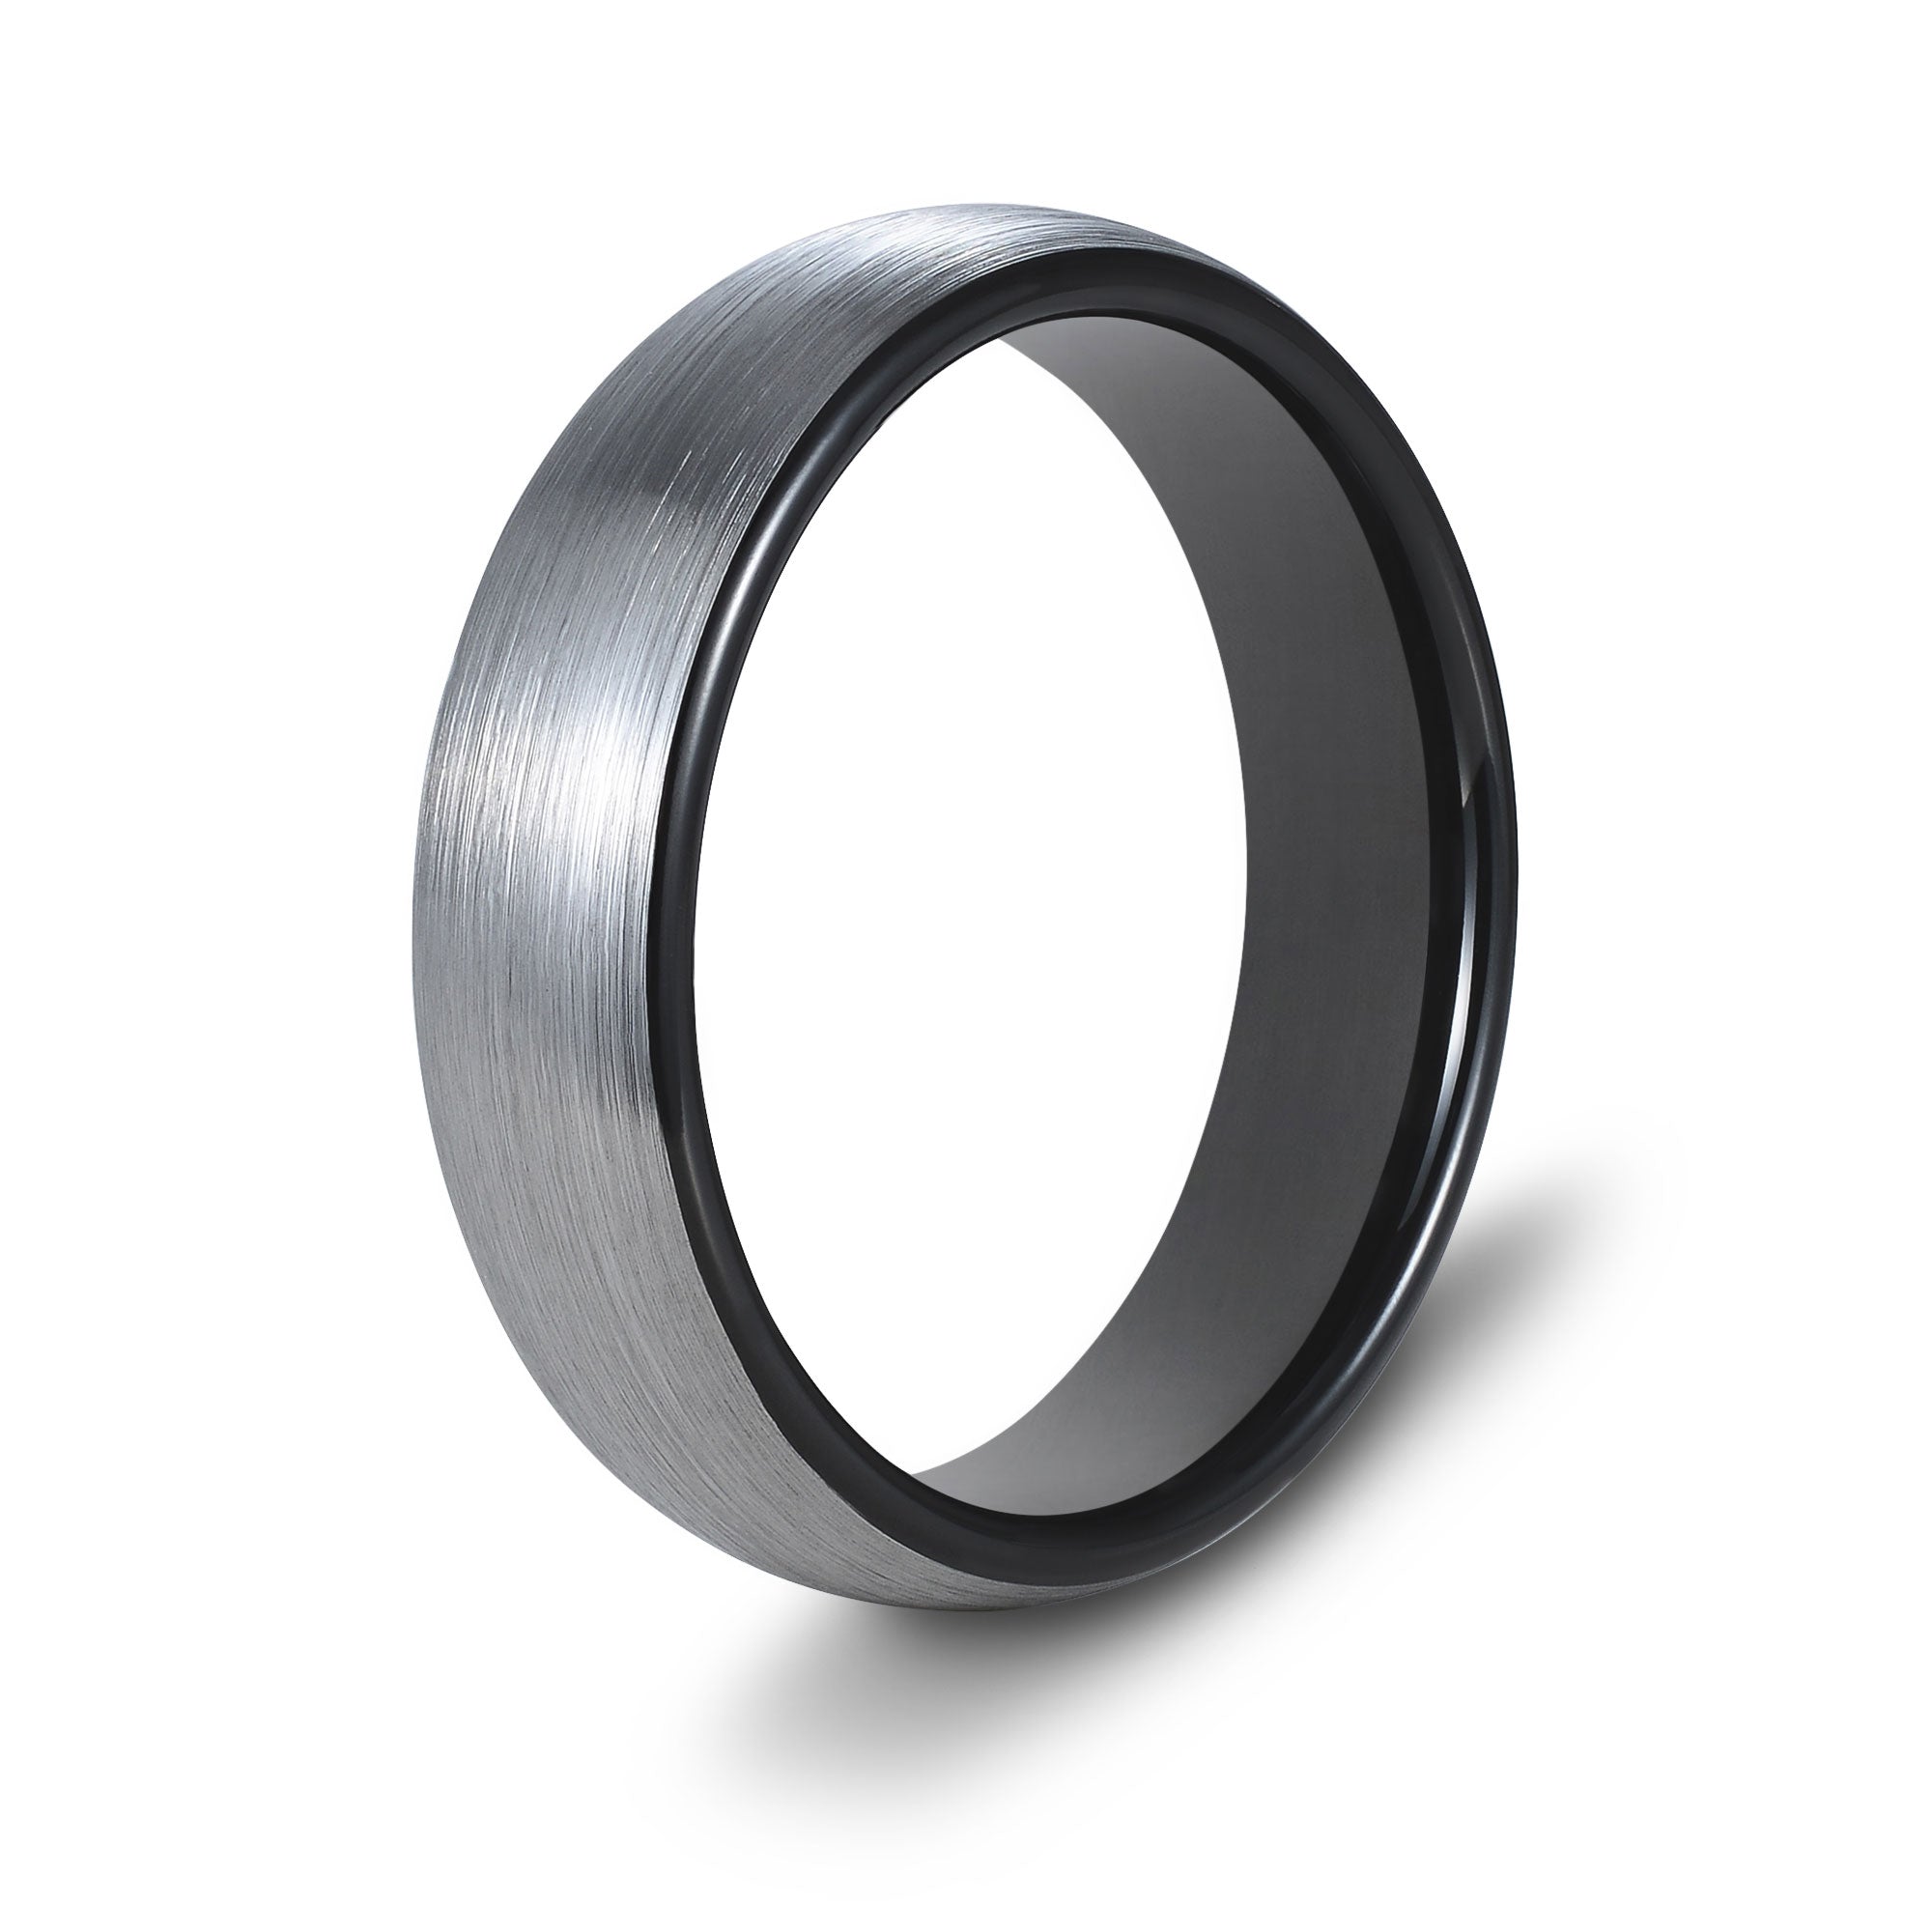 The Eloquent - Silver 6mm Brushed Tungsten Ring